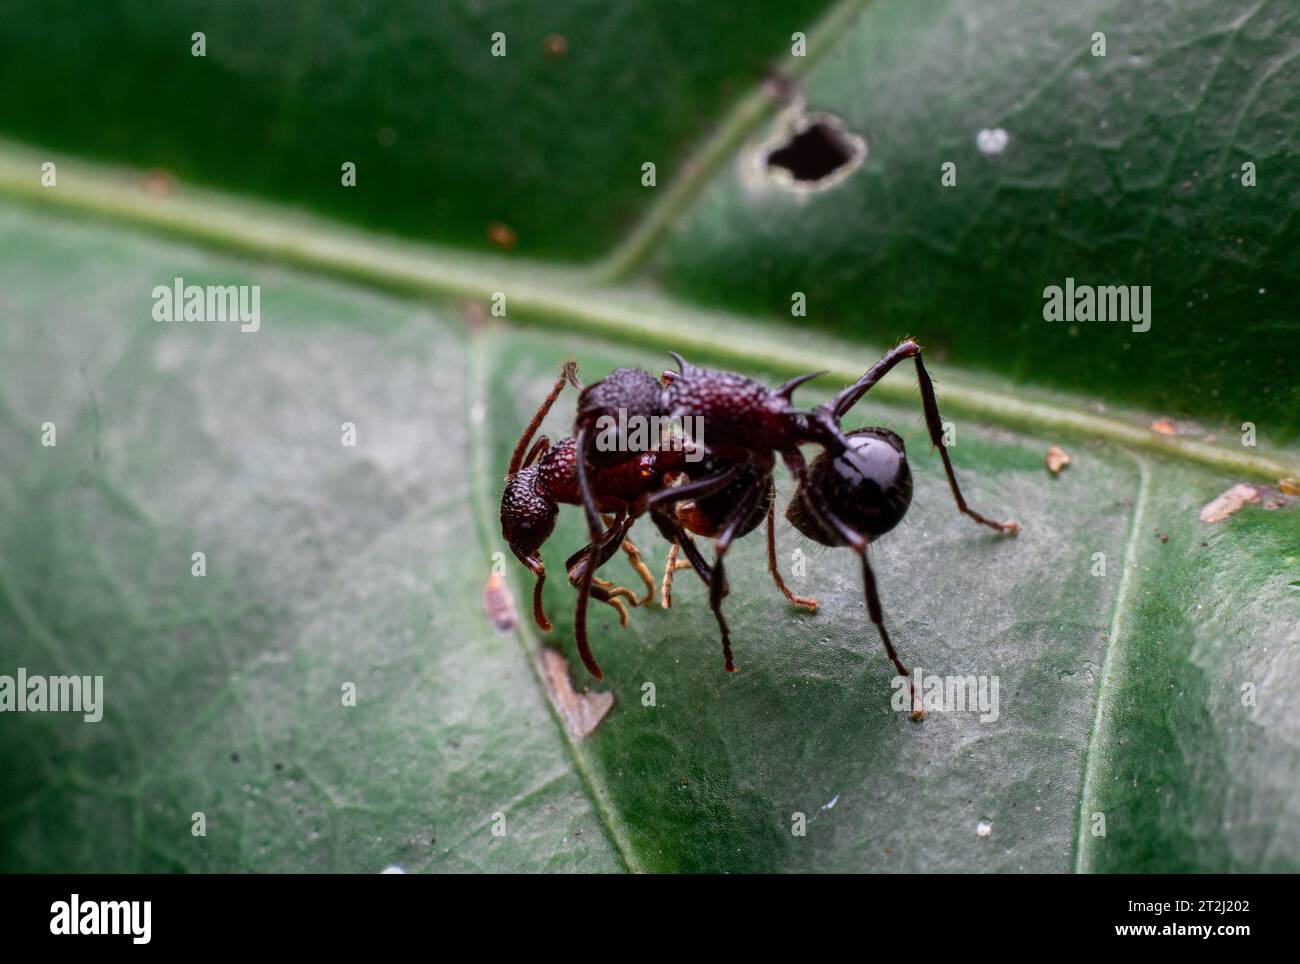 ants fight on a green leaf Stock Photo